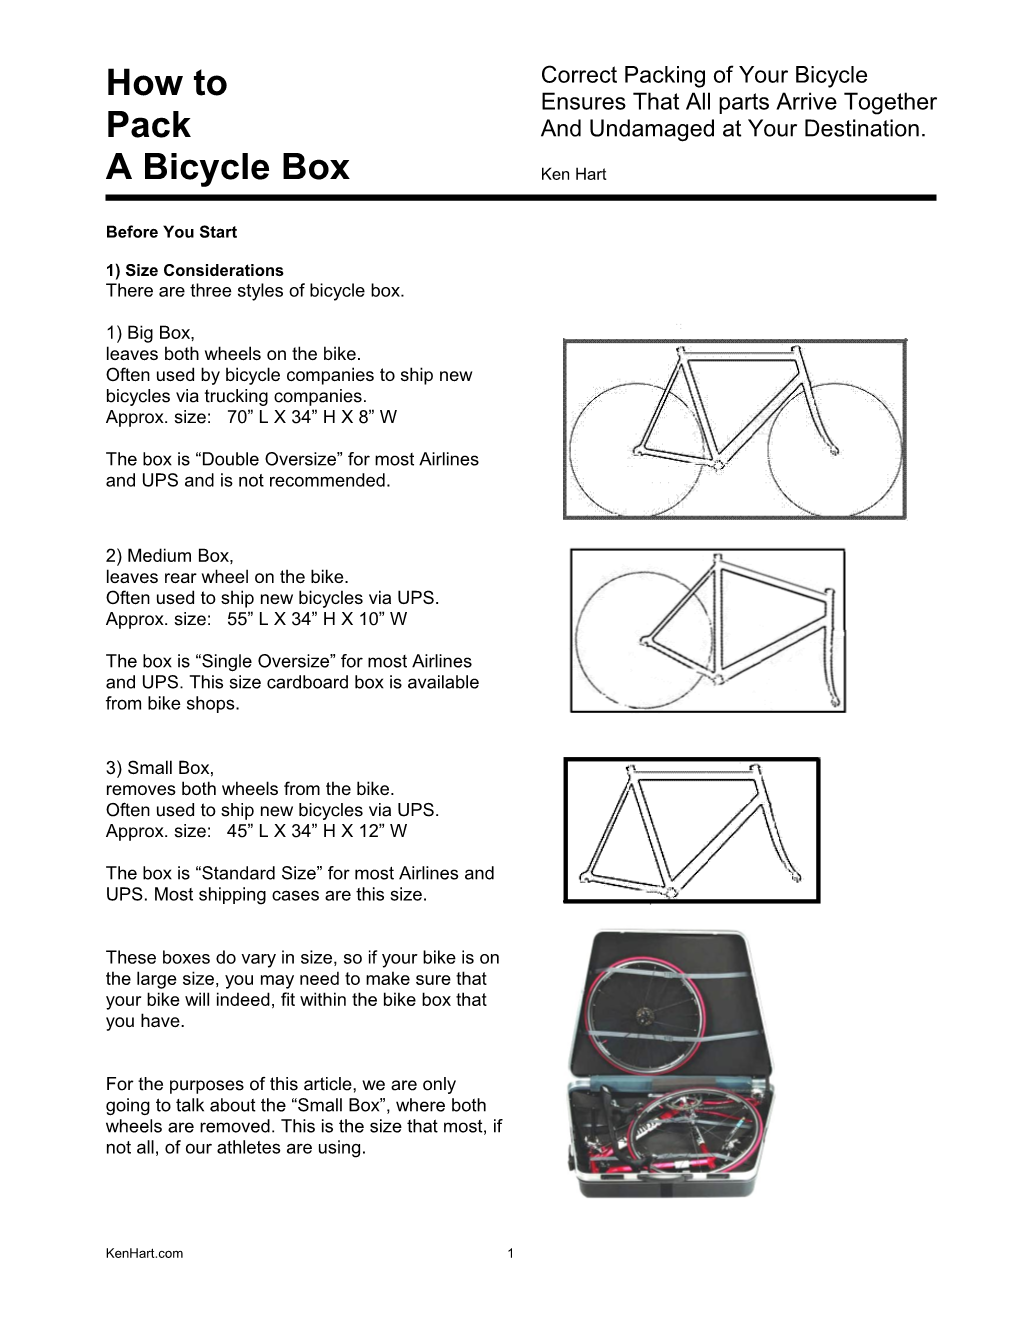 How to Fit a Bicycle Helmet